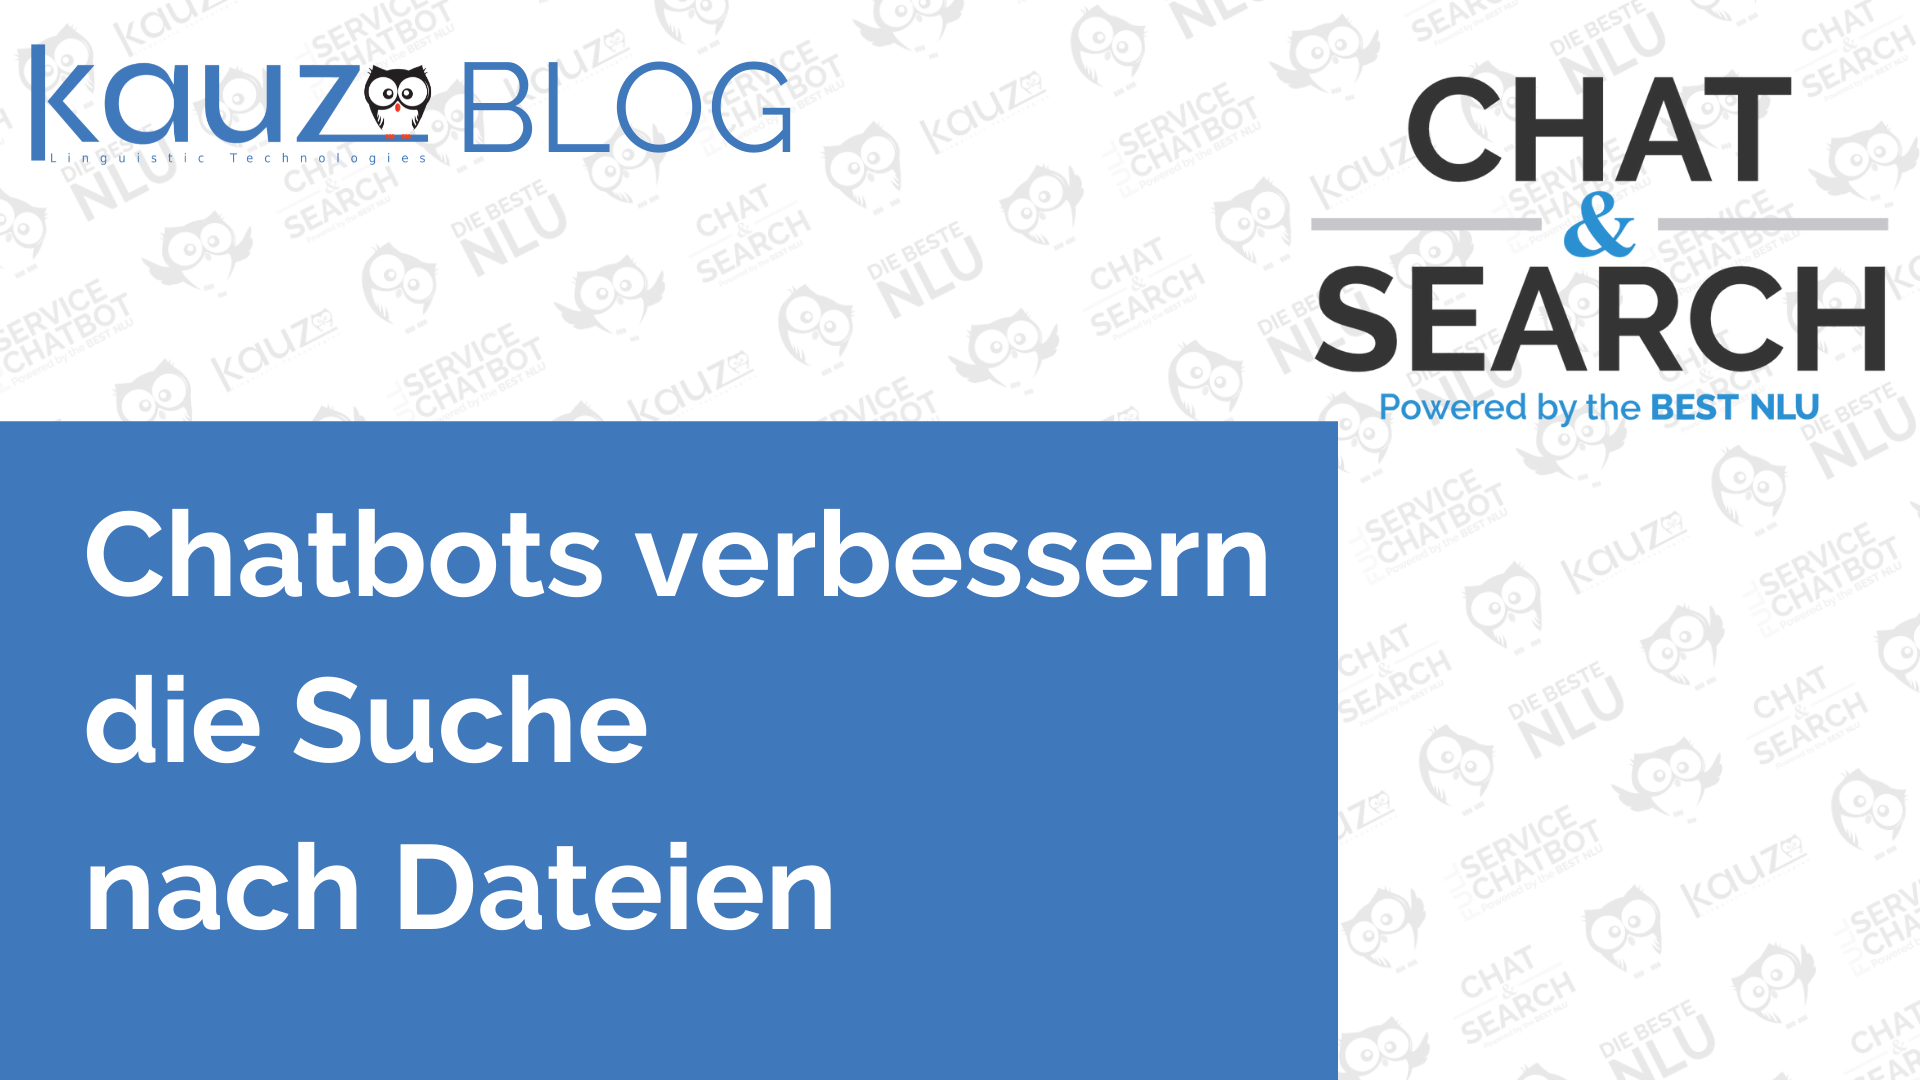 chat and search chatbot suche